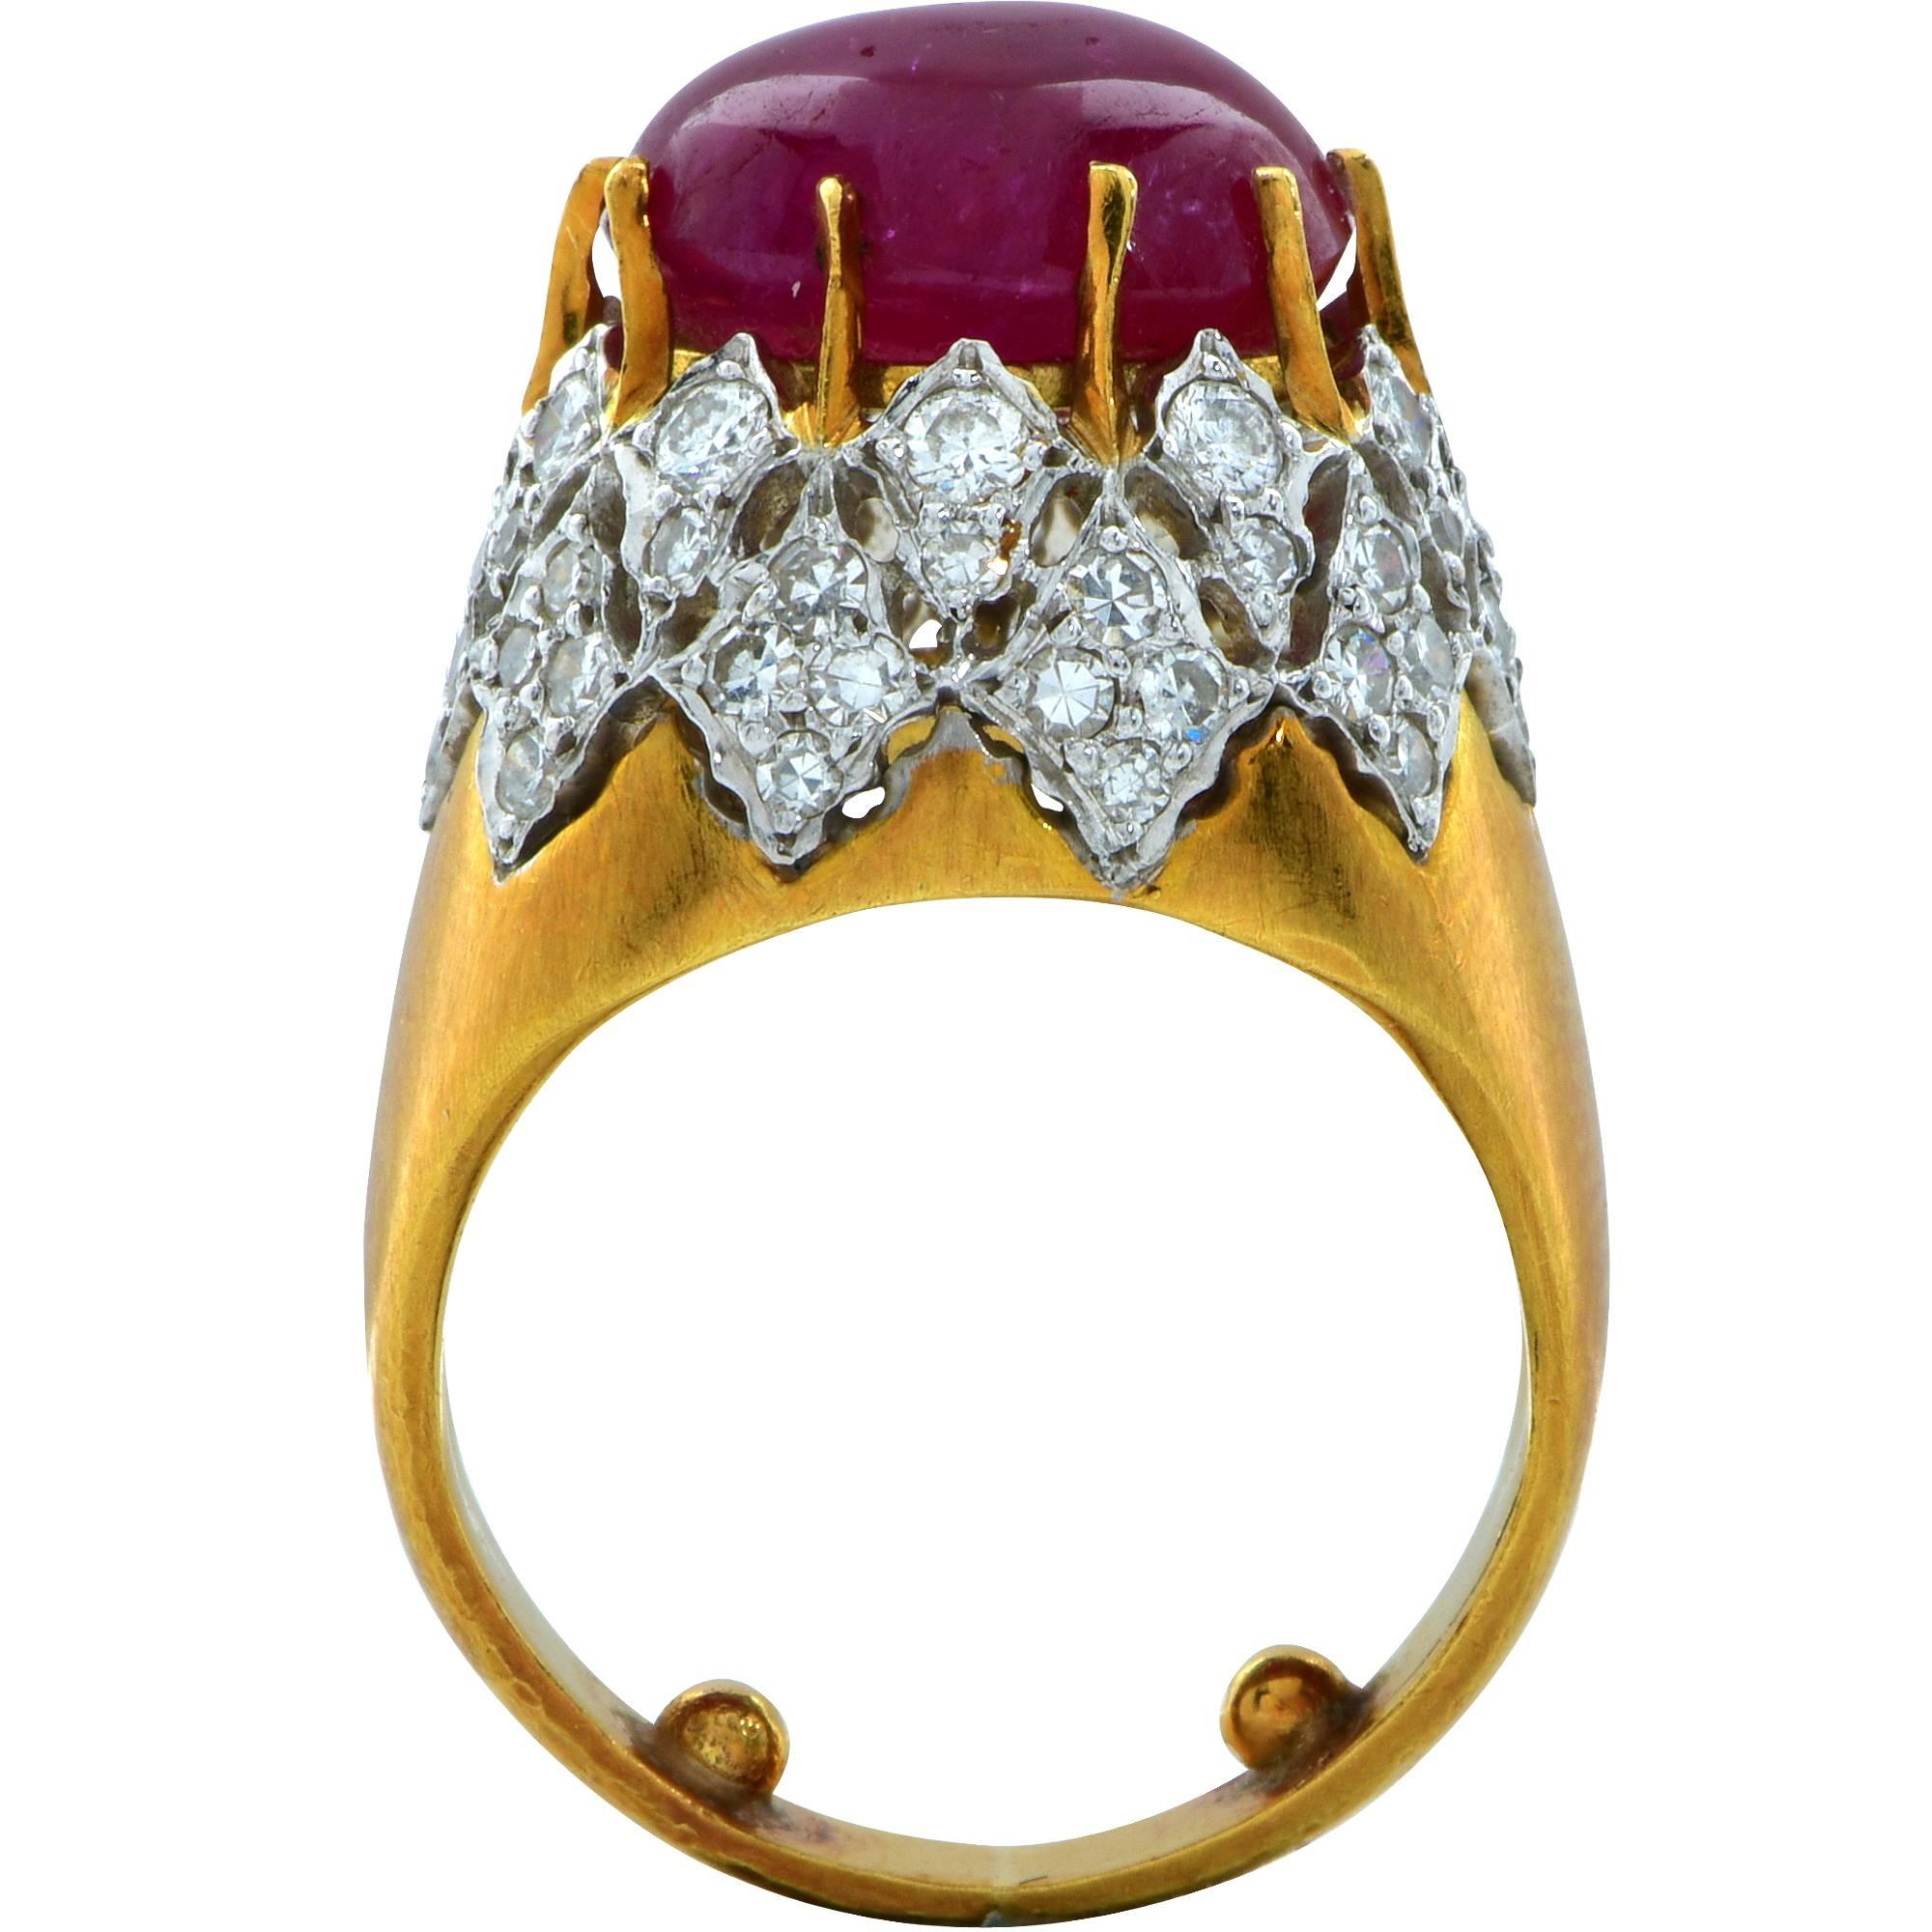 18k yellow gold platinum ruby and diamond ring featuring a cabochon cut ruby weighing approximately 7.6cts set above platinum and 18k yellow gold accented by 60 round brilliant and single cut diamonds weighing approximately 1.15cts, H color, VS